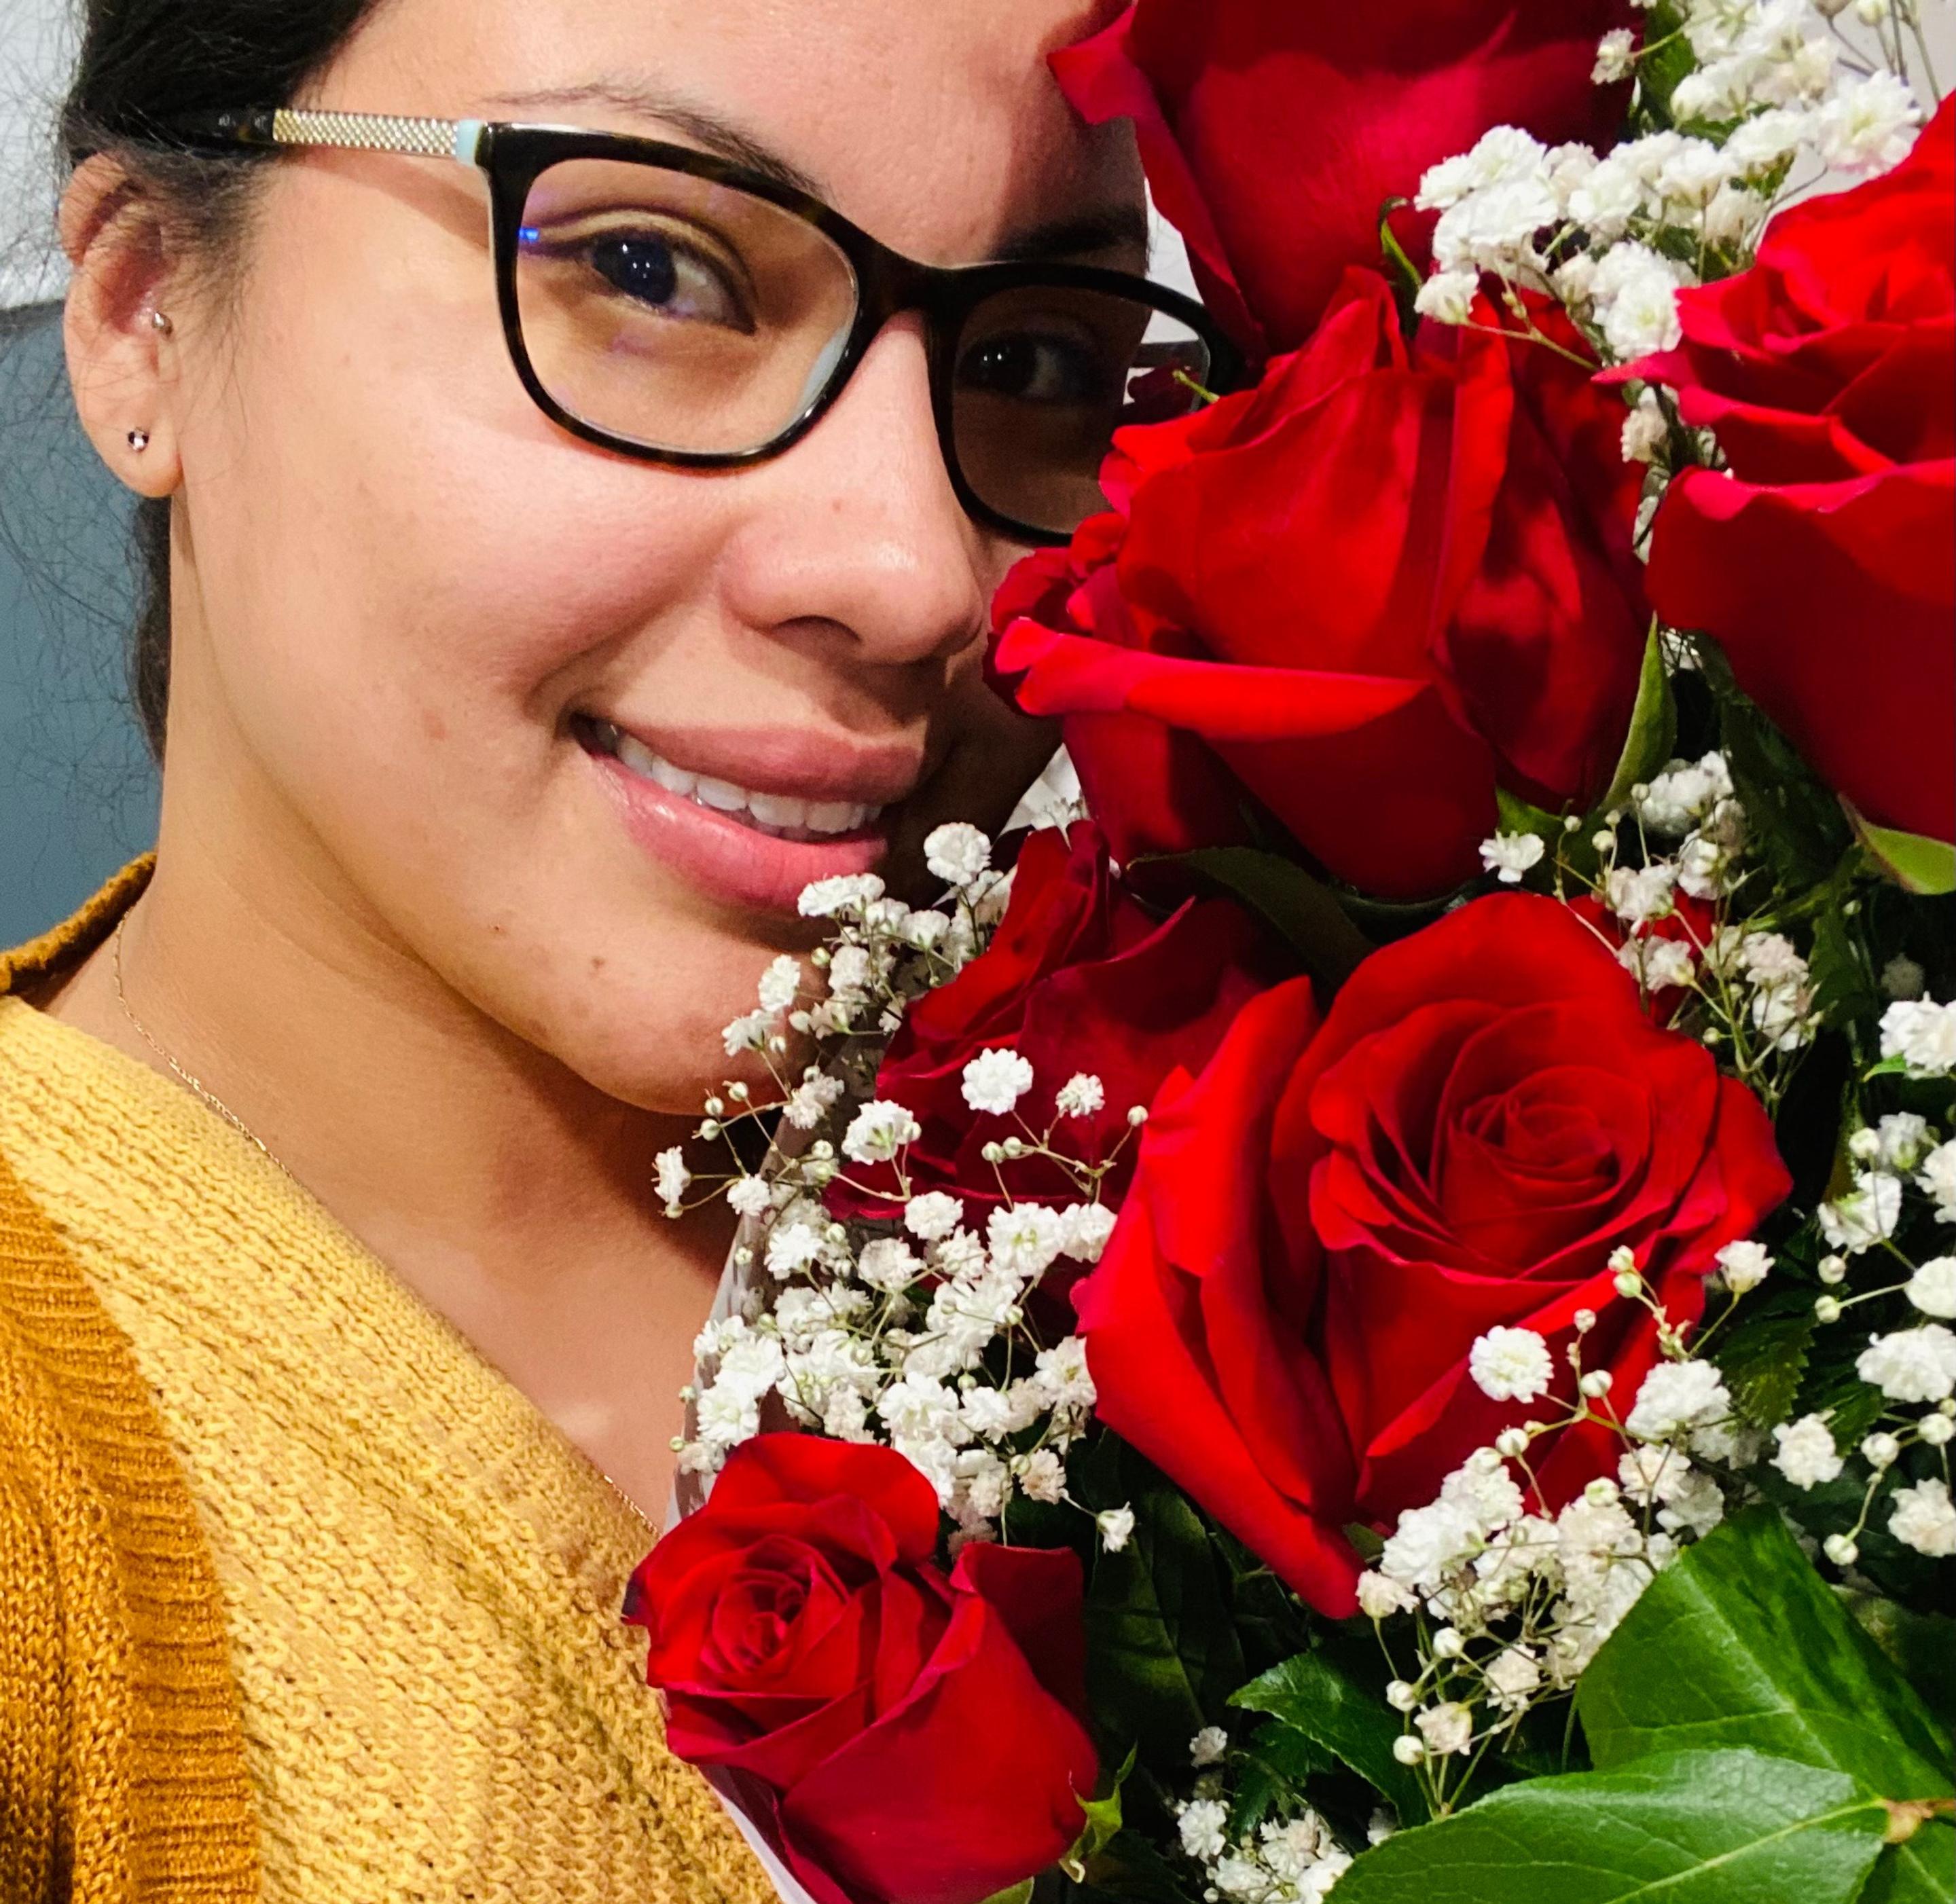 Contented woman with glasses posing with a vibrant bouquet of red roses and baby's breath for Valentine's Day